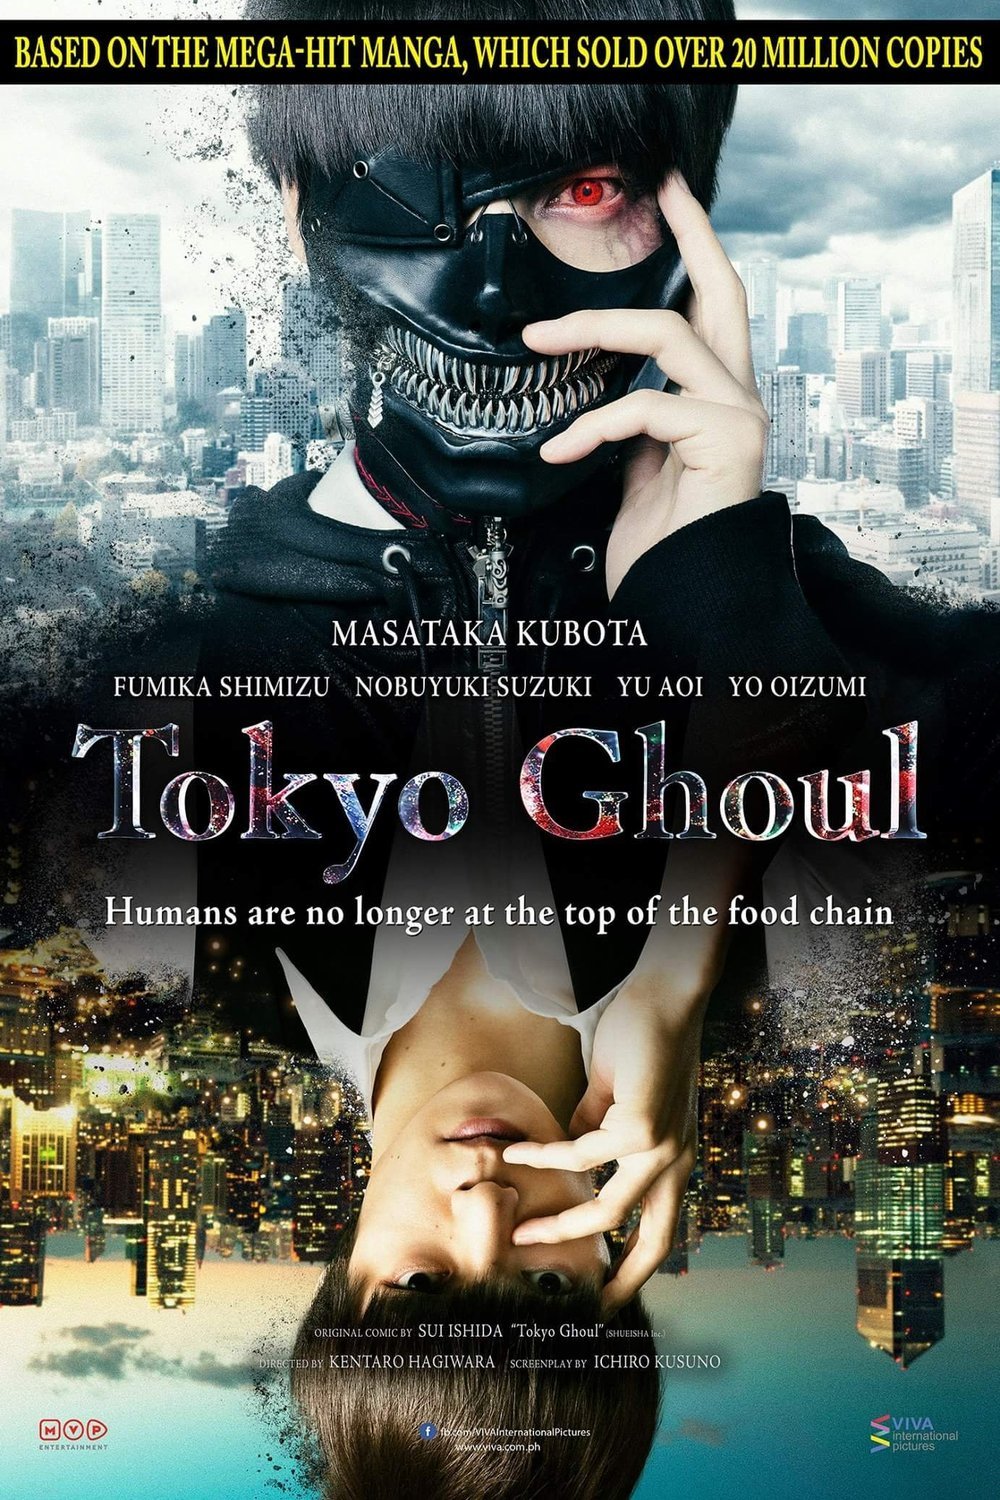 Poster of the movie Tokyo Ghoul